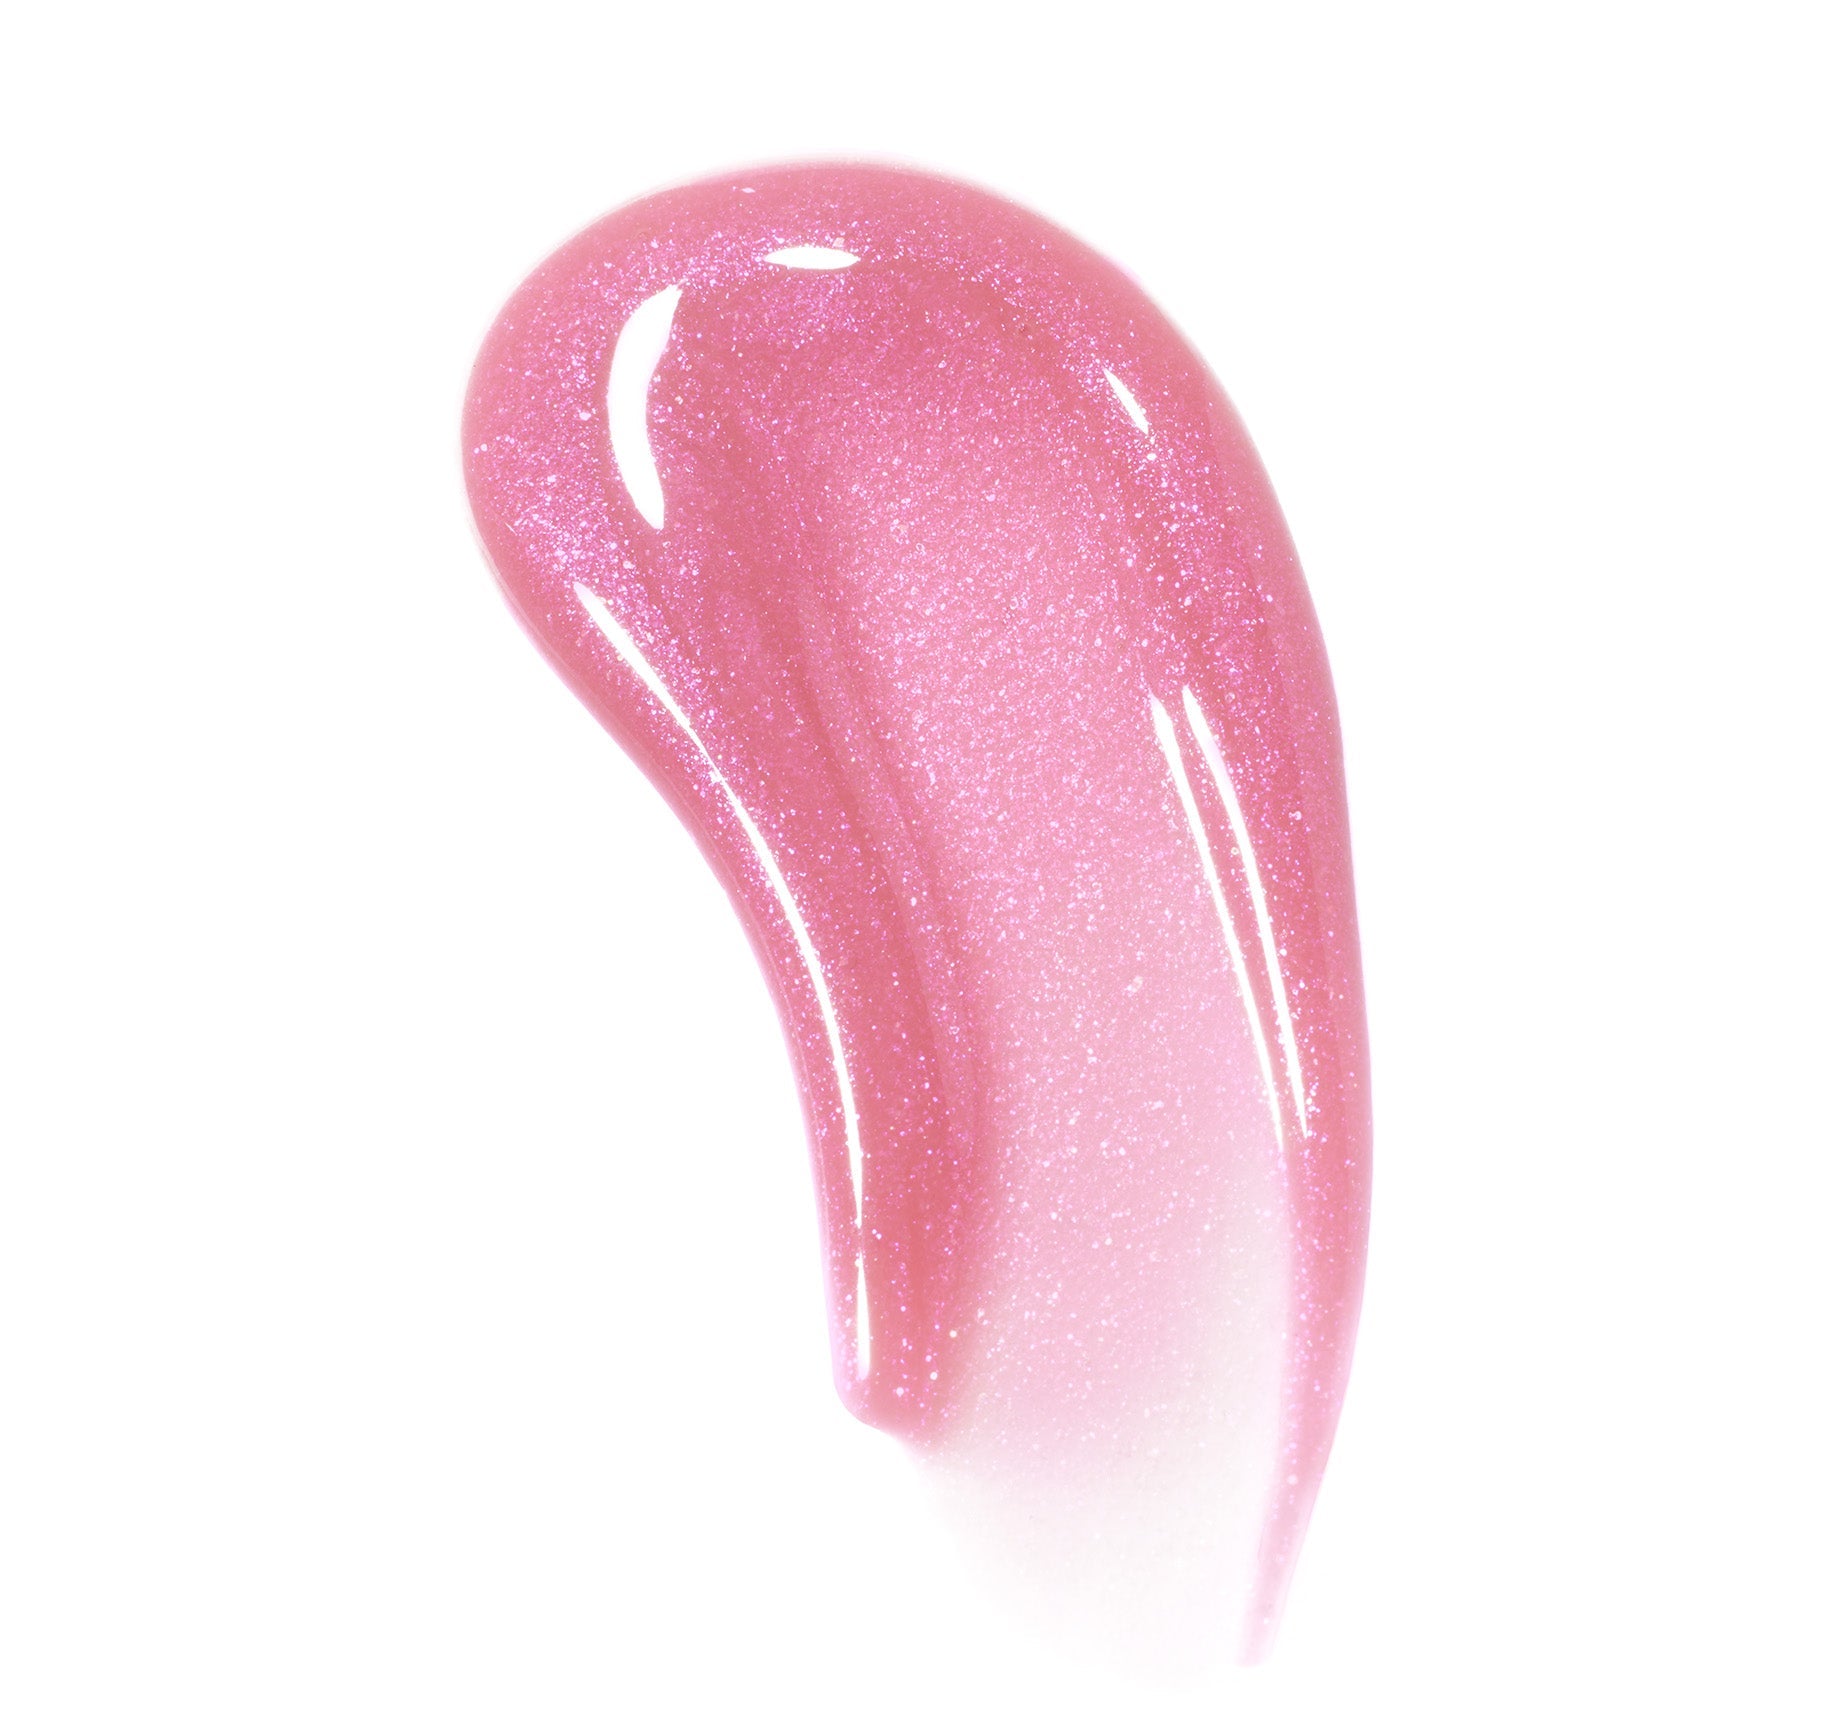 Dripglass Glazed High Shine Lip Gloss - Opalescent Orchid - Image 2